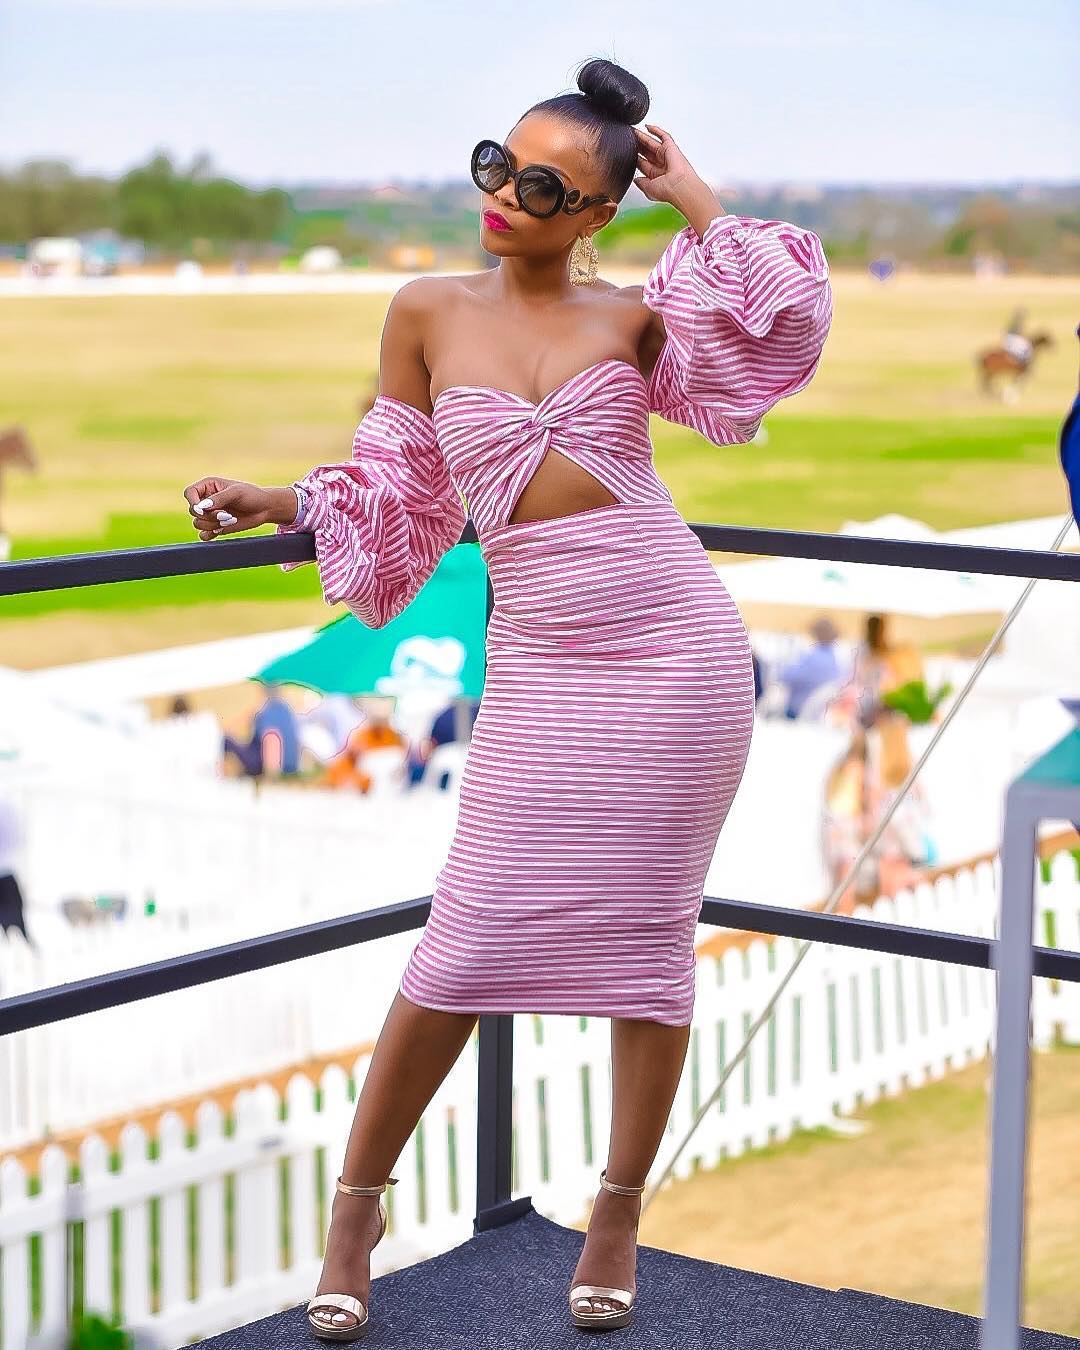 Check Out The Most Stylish Looks At The 2018 Nedbank International Polo ...